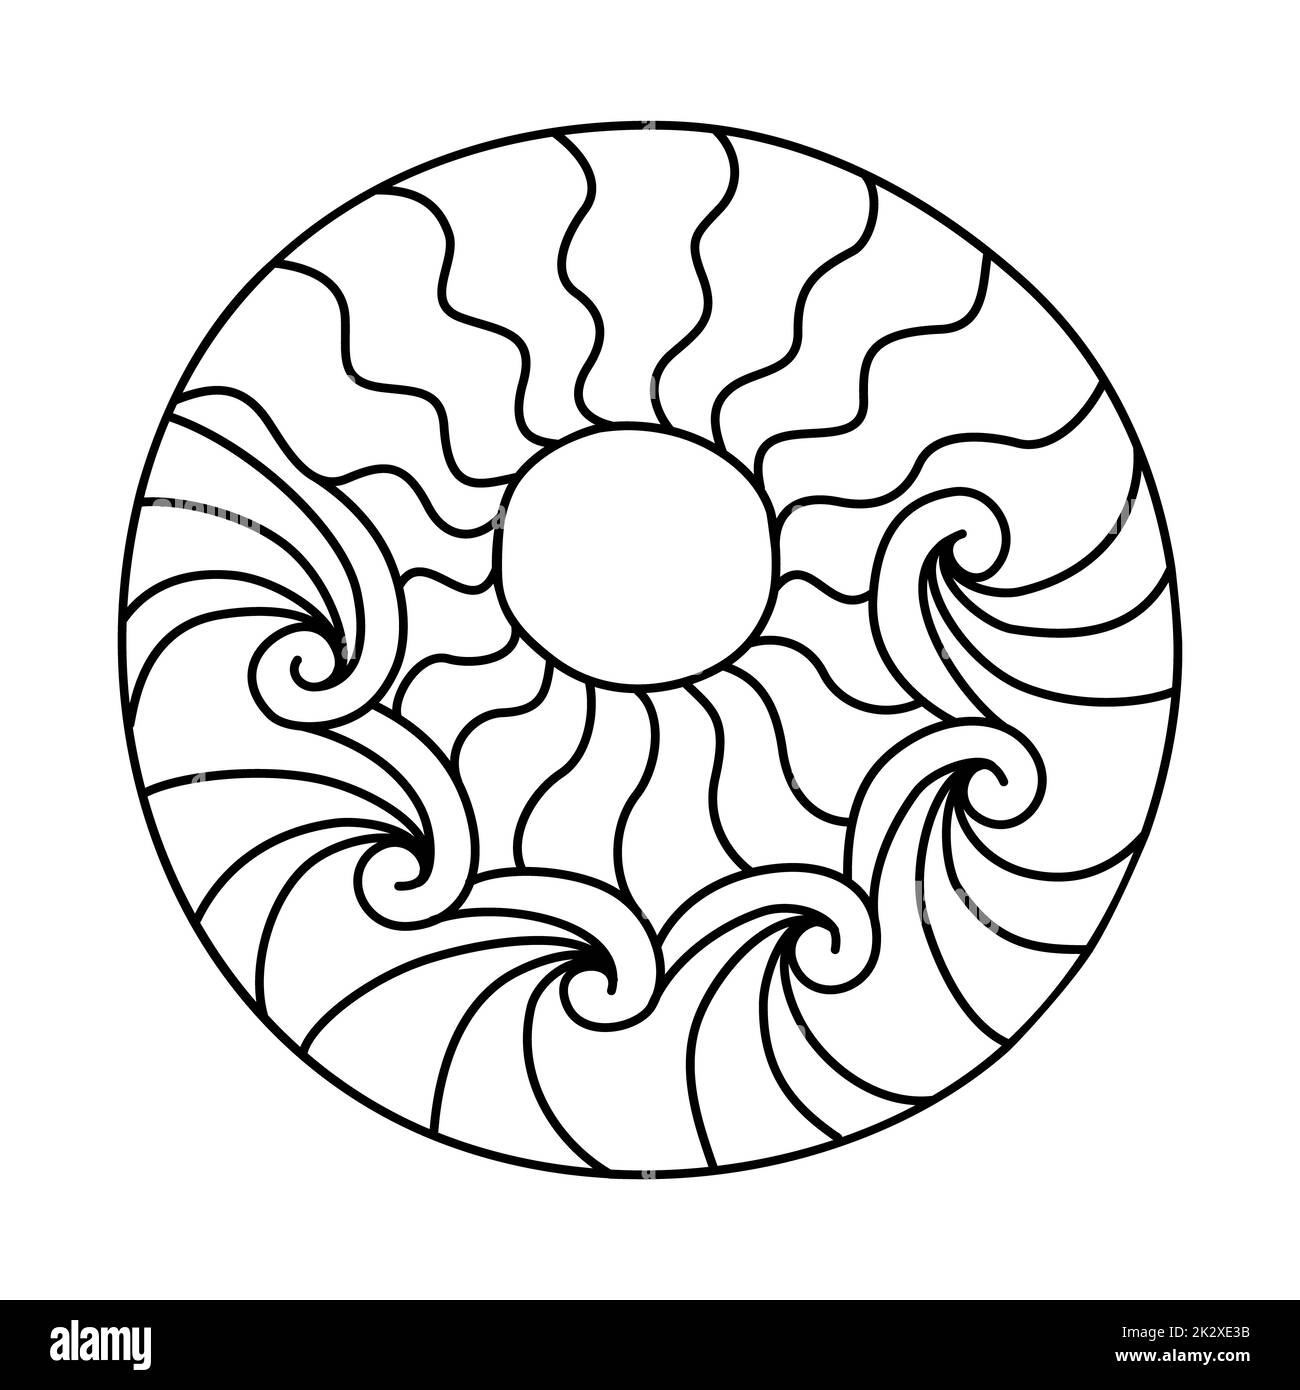 Circle filled with hand drawn doodles for coloring Stock Photo